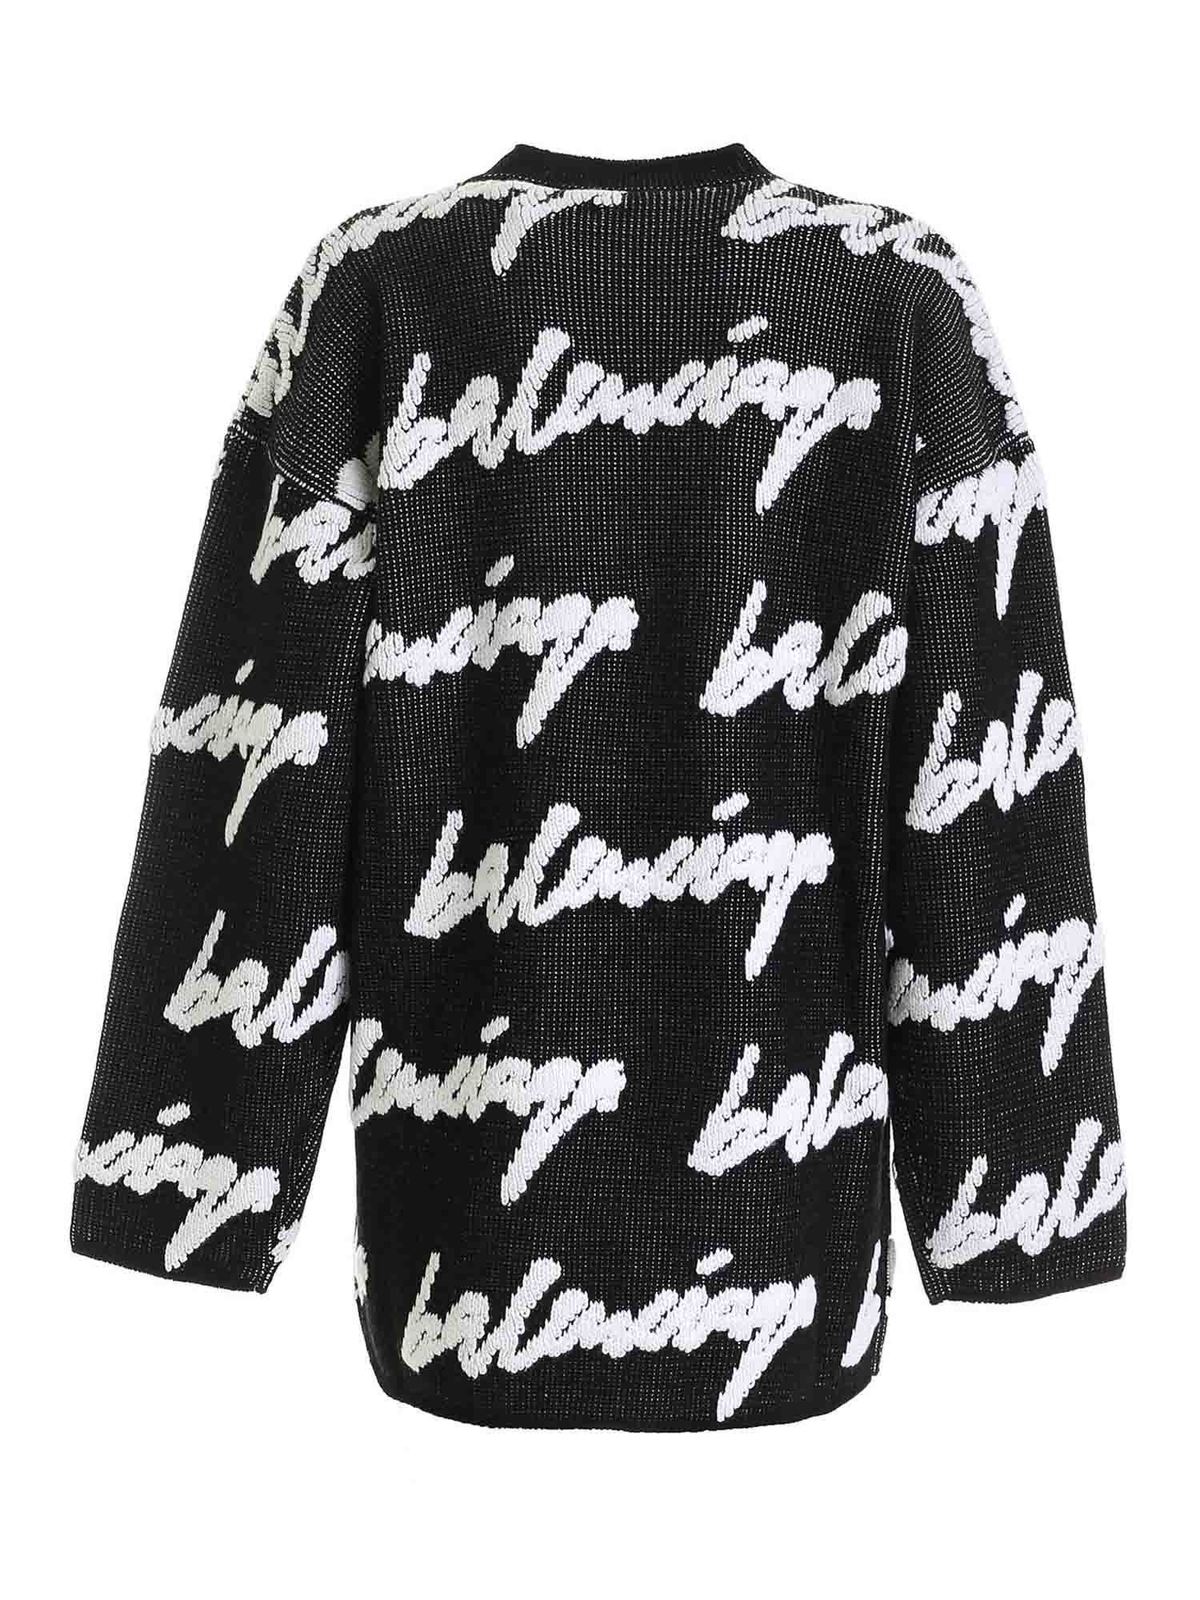 Scribble print pullover in black and white